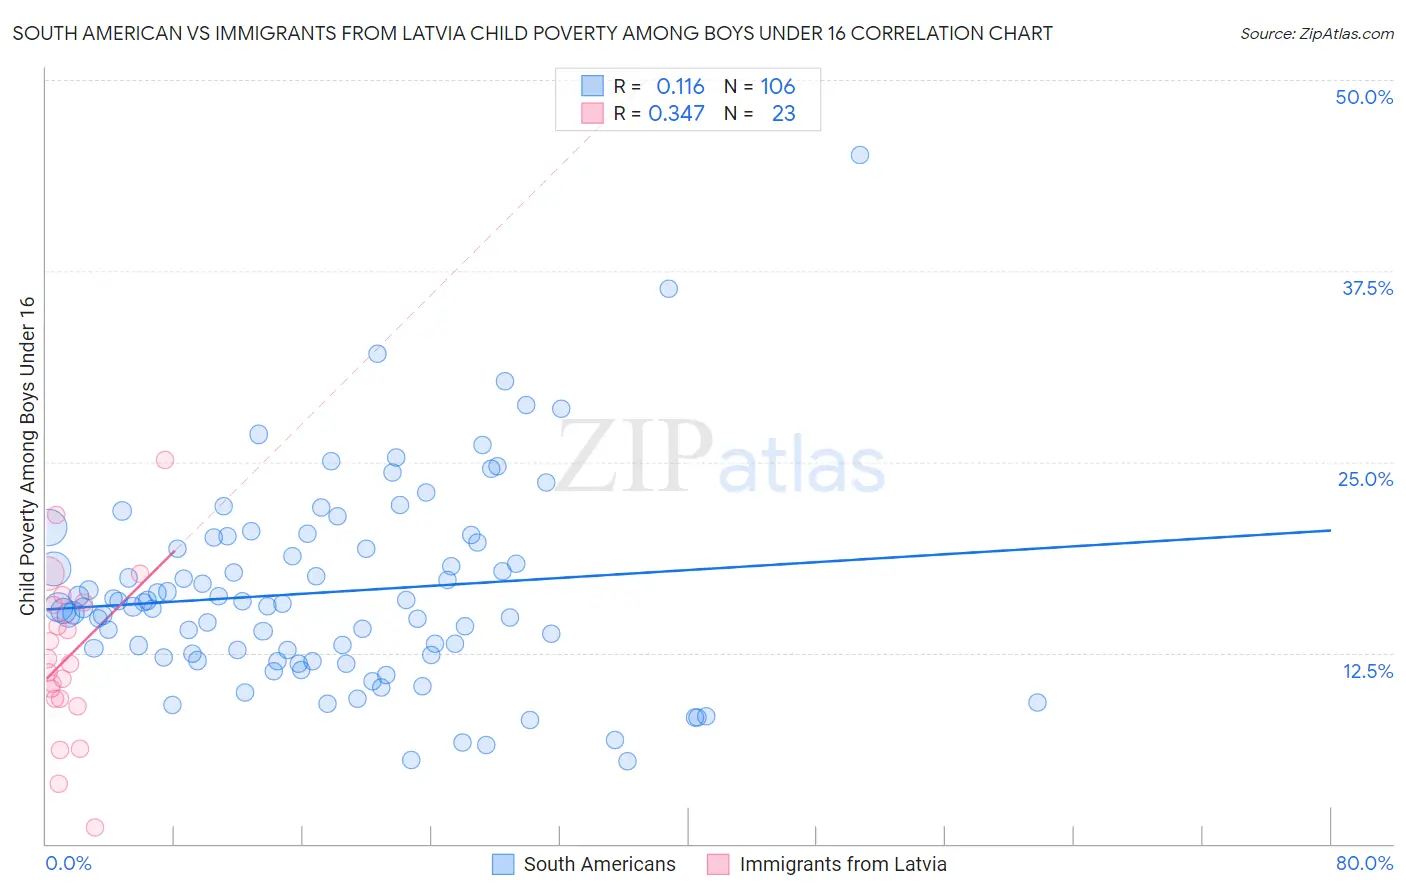 South American vs Immigrants from Latvia Child Poverty Among Boys Under 16